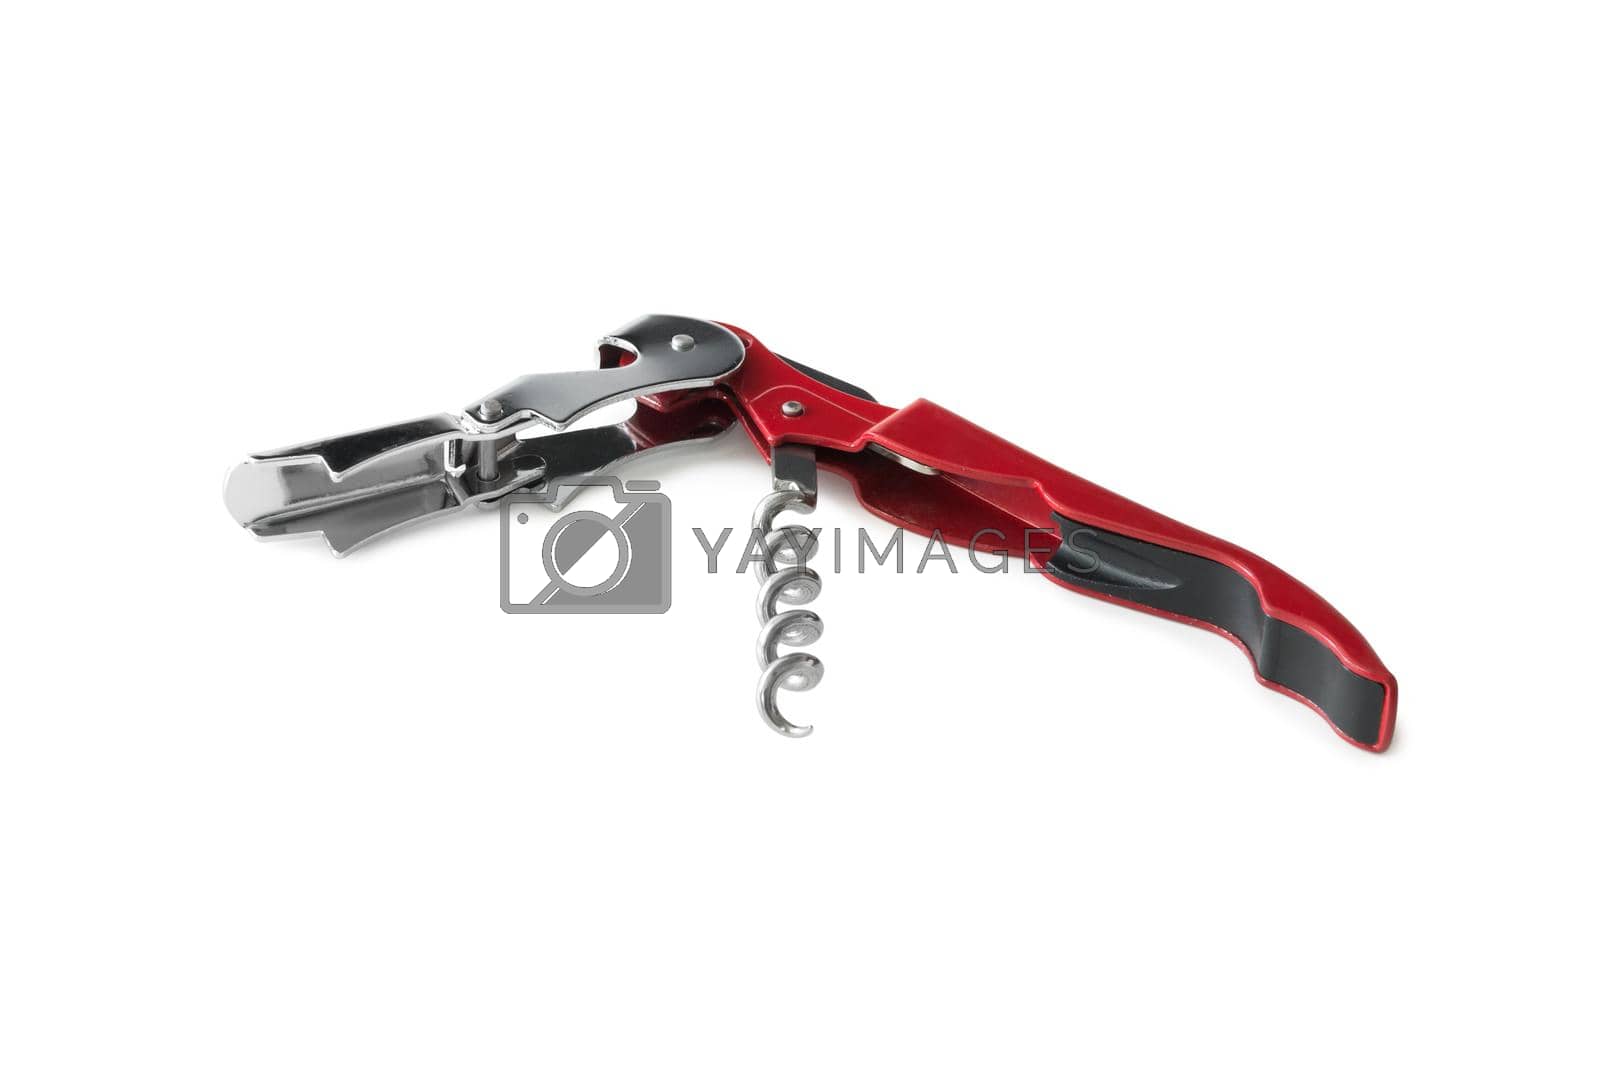 Royalty free image of new stainless corkscrew by tan4ikk1